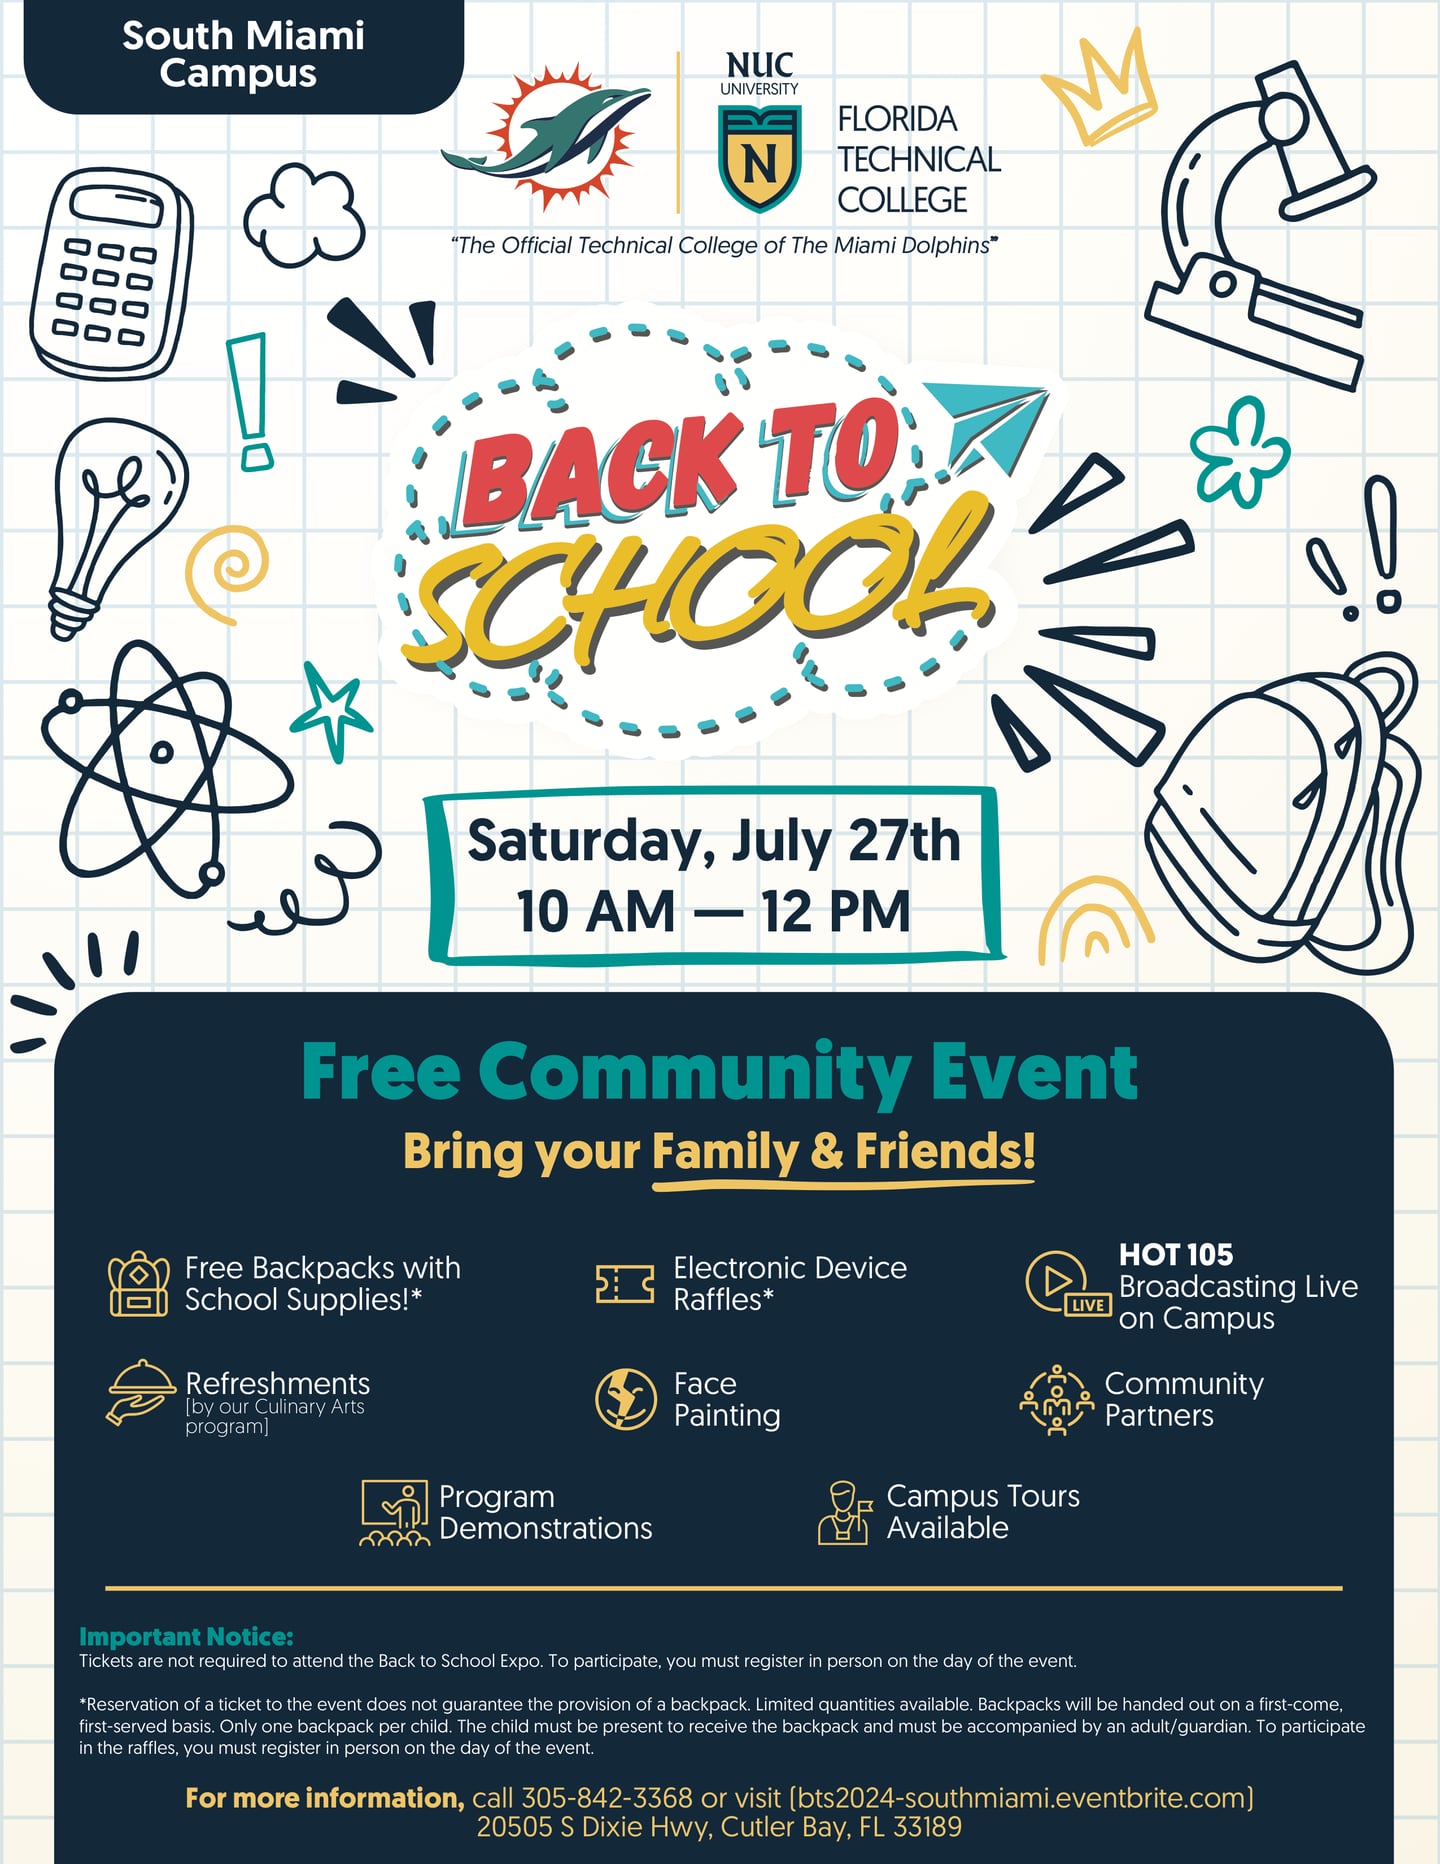 Florida Technical College Annual Back to School Event